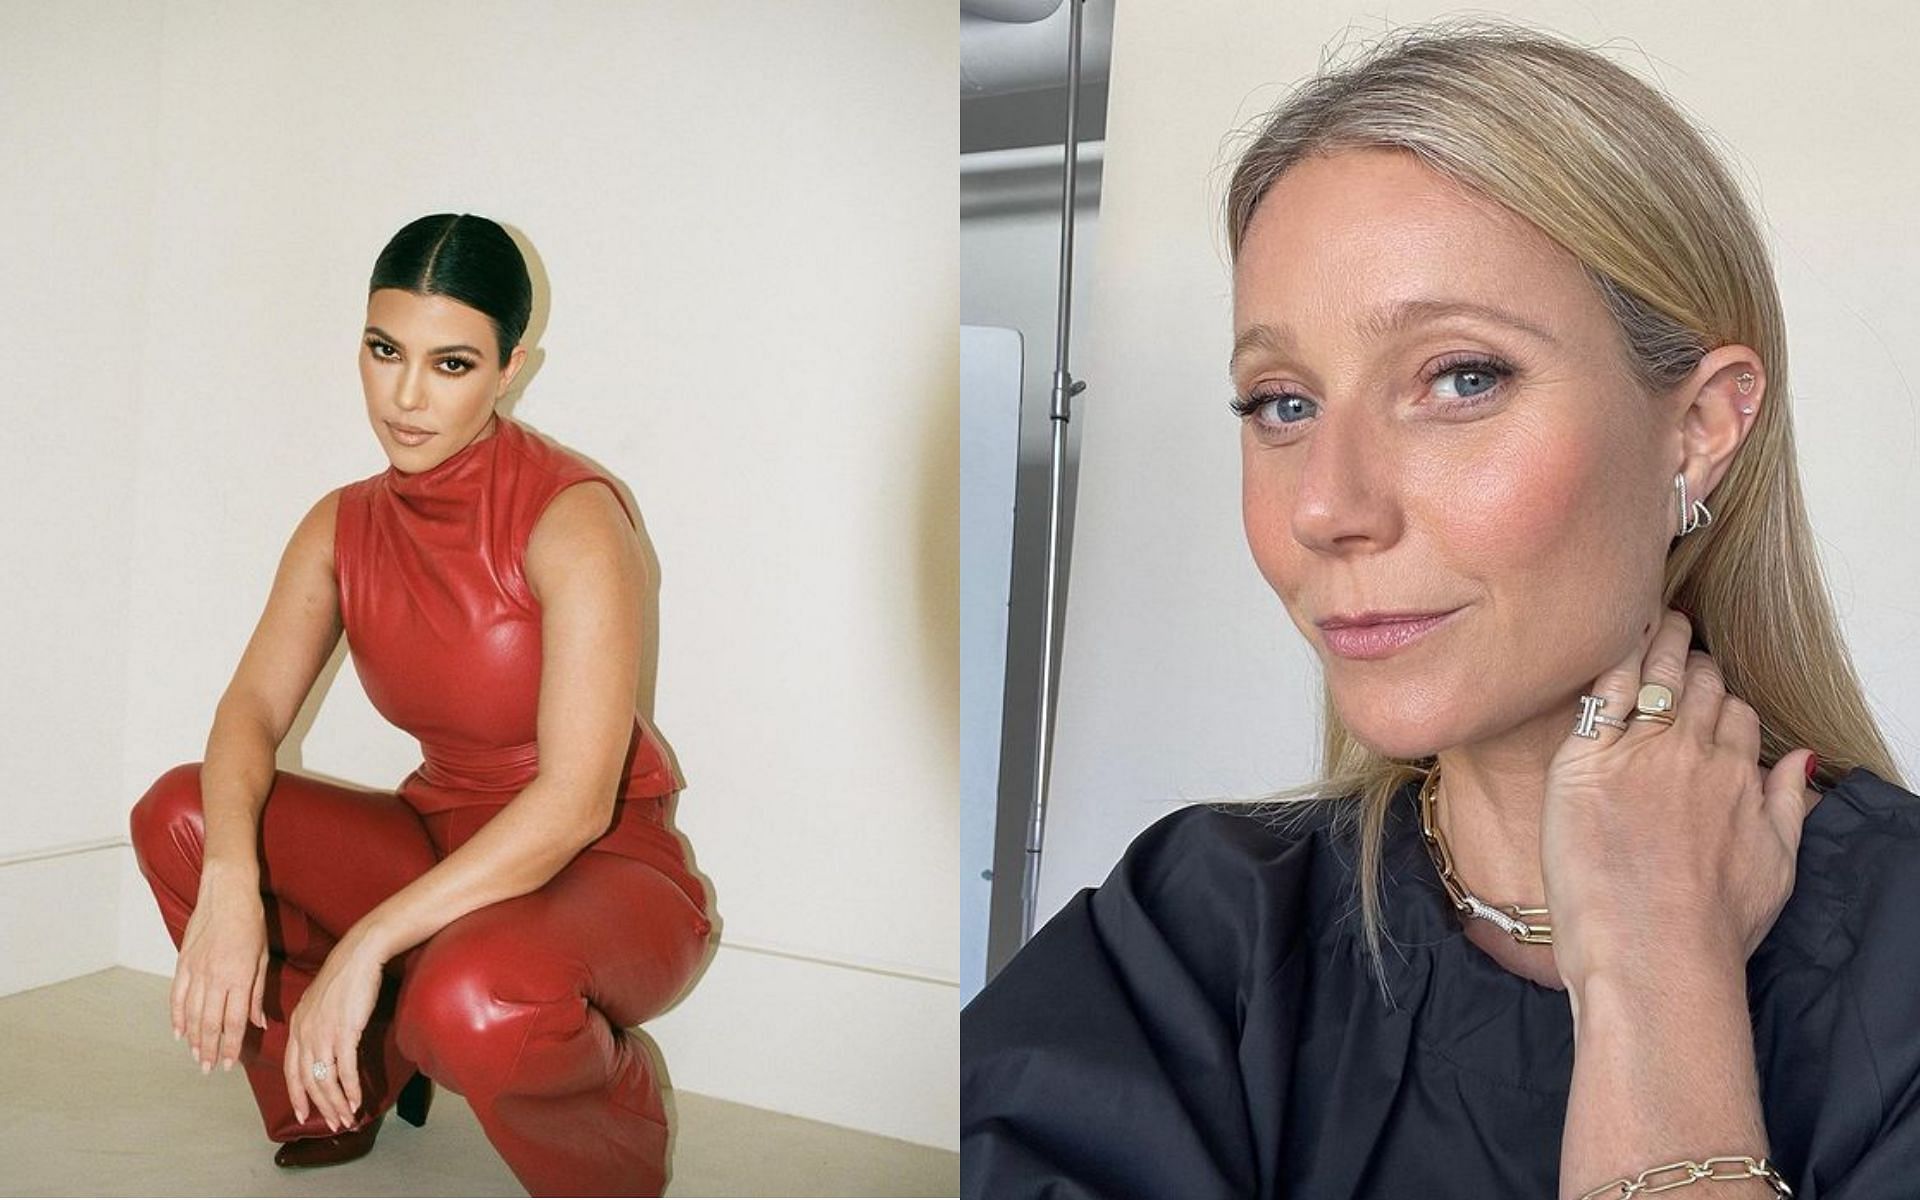 Kourtney Kardashian and Gwyneth Paltrow collaborate together for a candle lauch (Images via Kourtneykardash and gwynethpaltrow/Instagram)